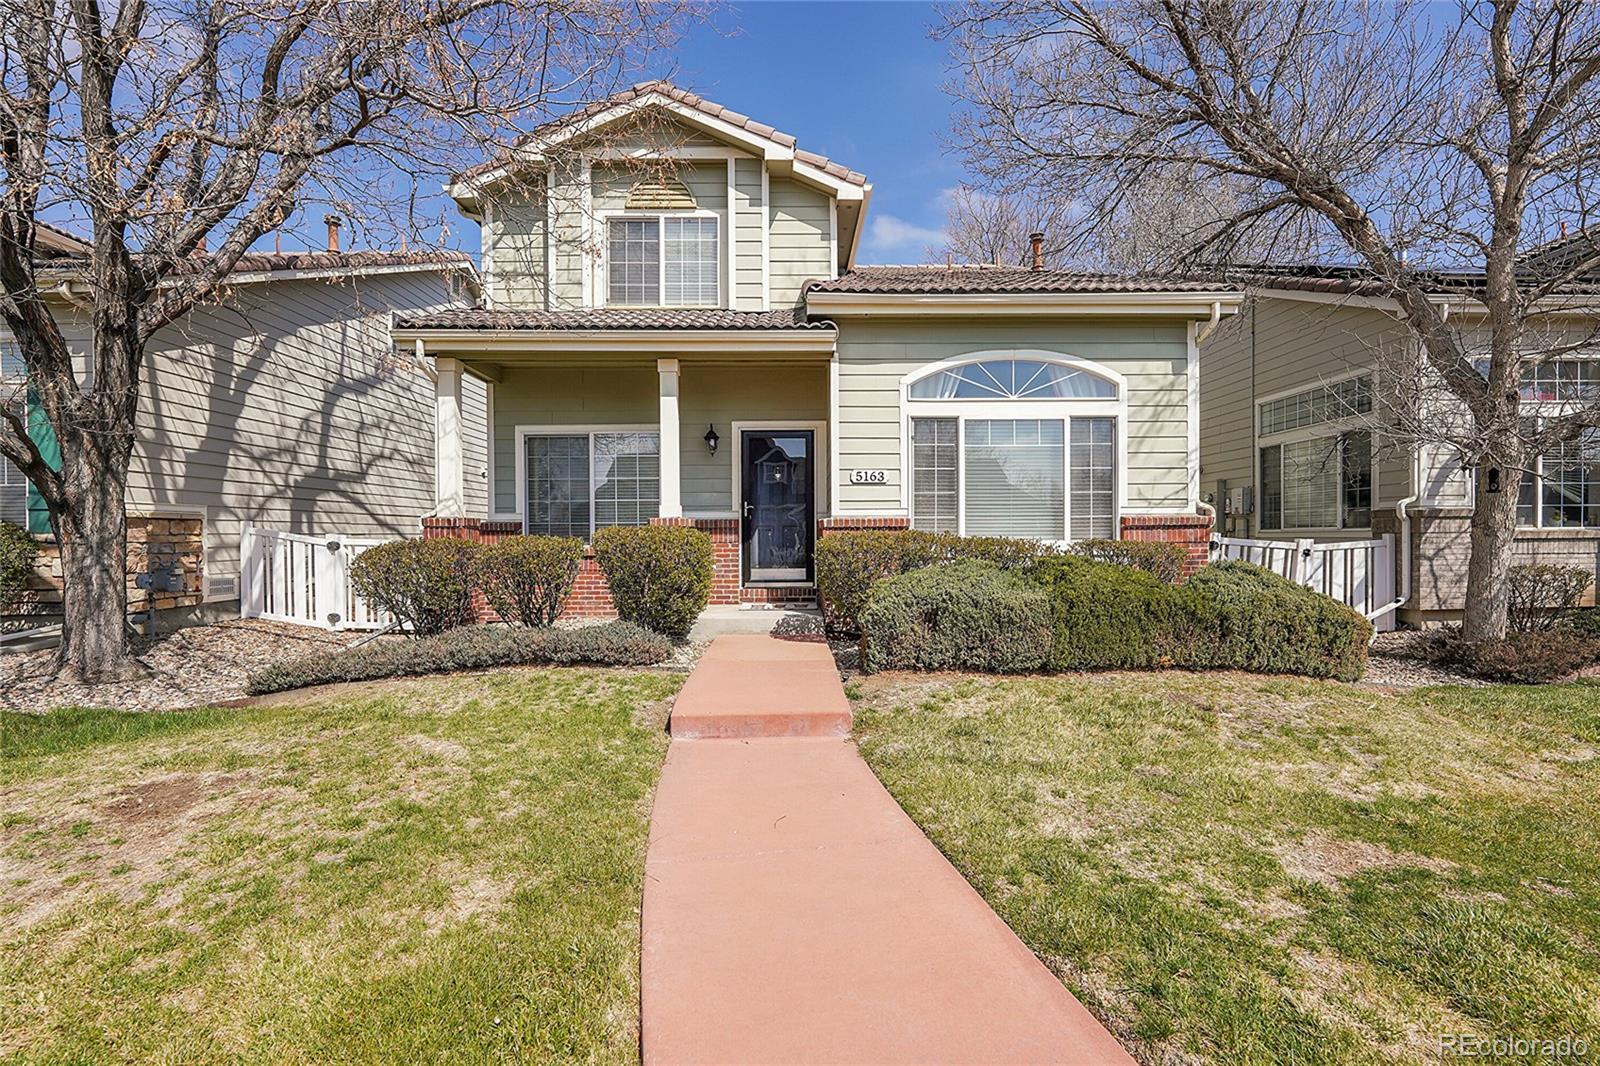 Photo one of 5163 Spyglass Dr Broomfield CO 80023 | MLS 9376302